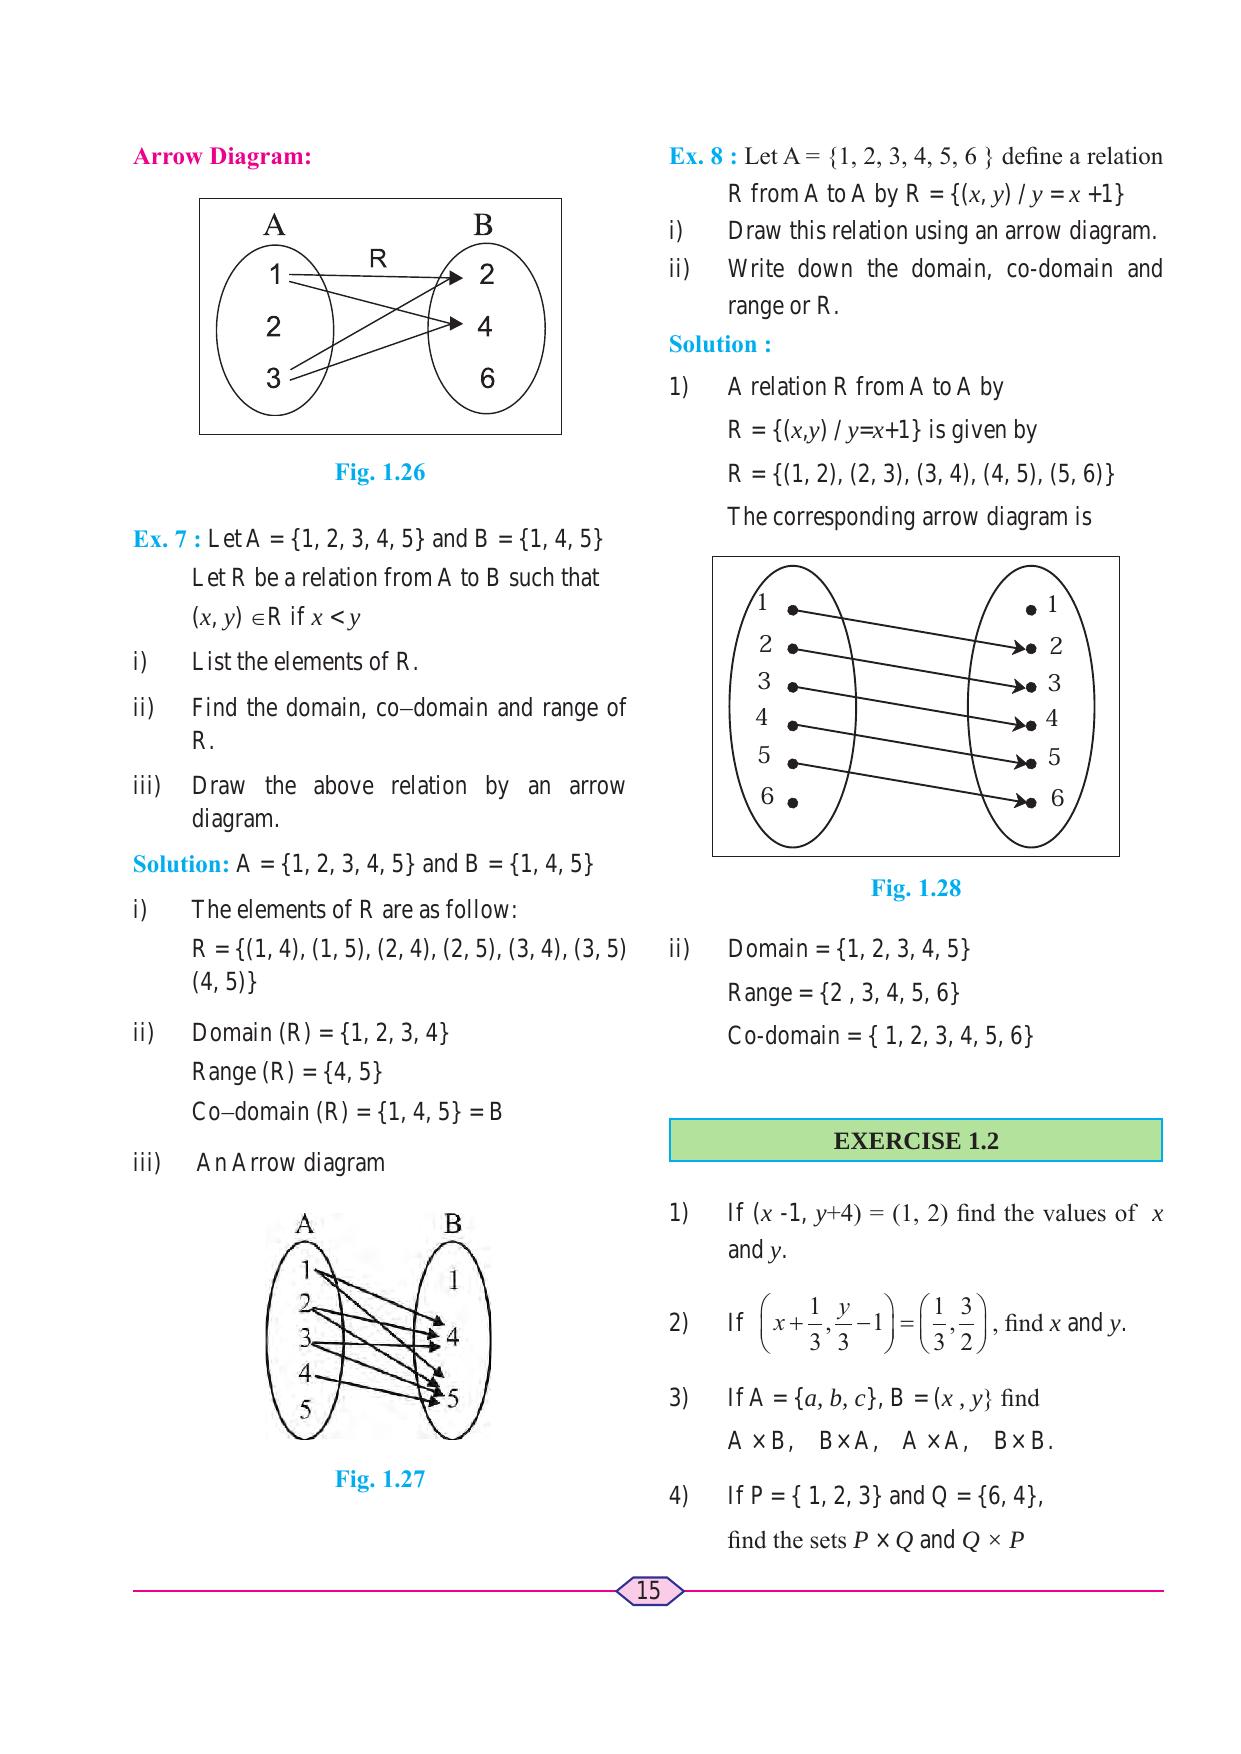 Maharashtra Board Class 11 Maths (Commerce) (Part 1) Textbook - Page 25